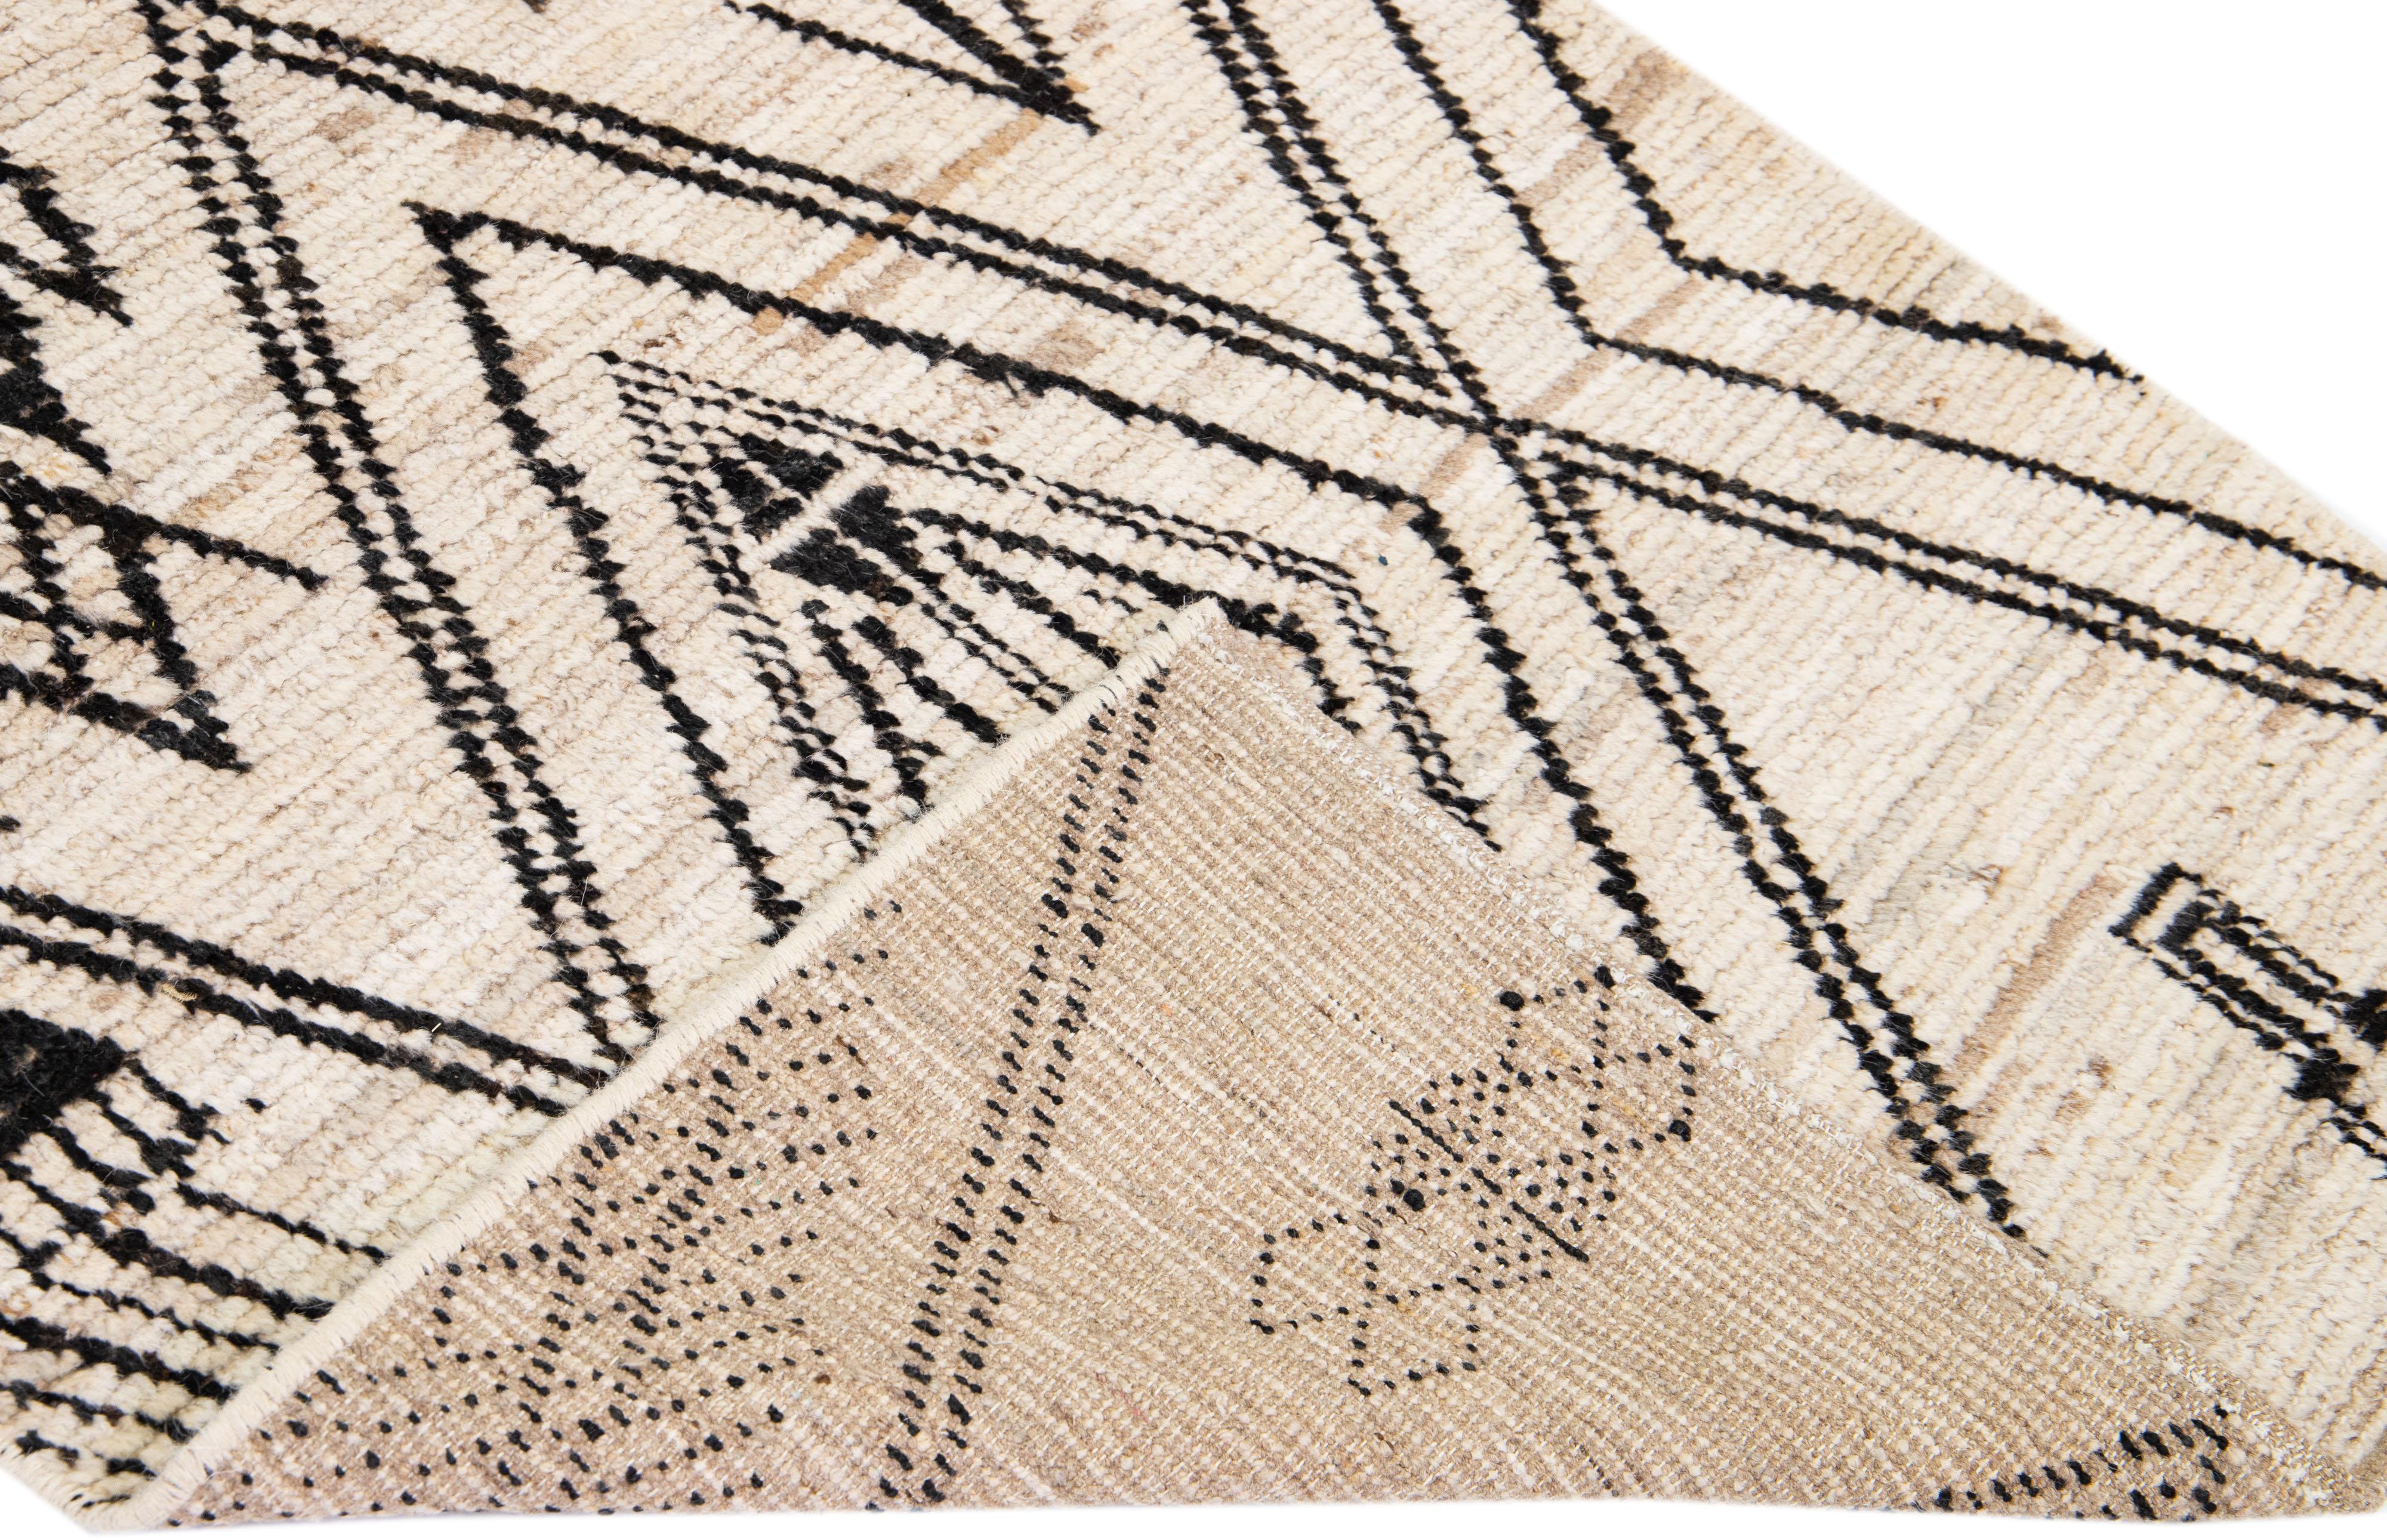 Beautiful Moroccan-style handmade wool rug with a beige field. This Modern rug has brown accents featuring a gorgeous all-over geometric tribal design.

This rug measures: 3'5